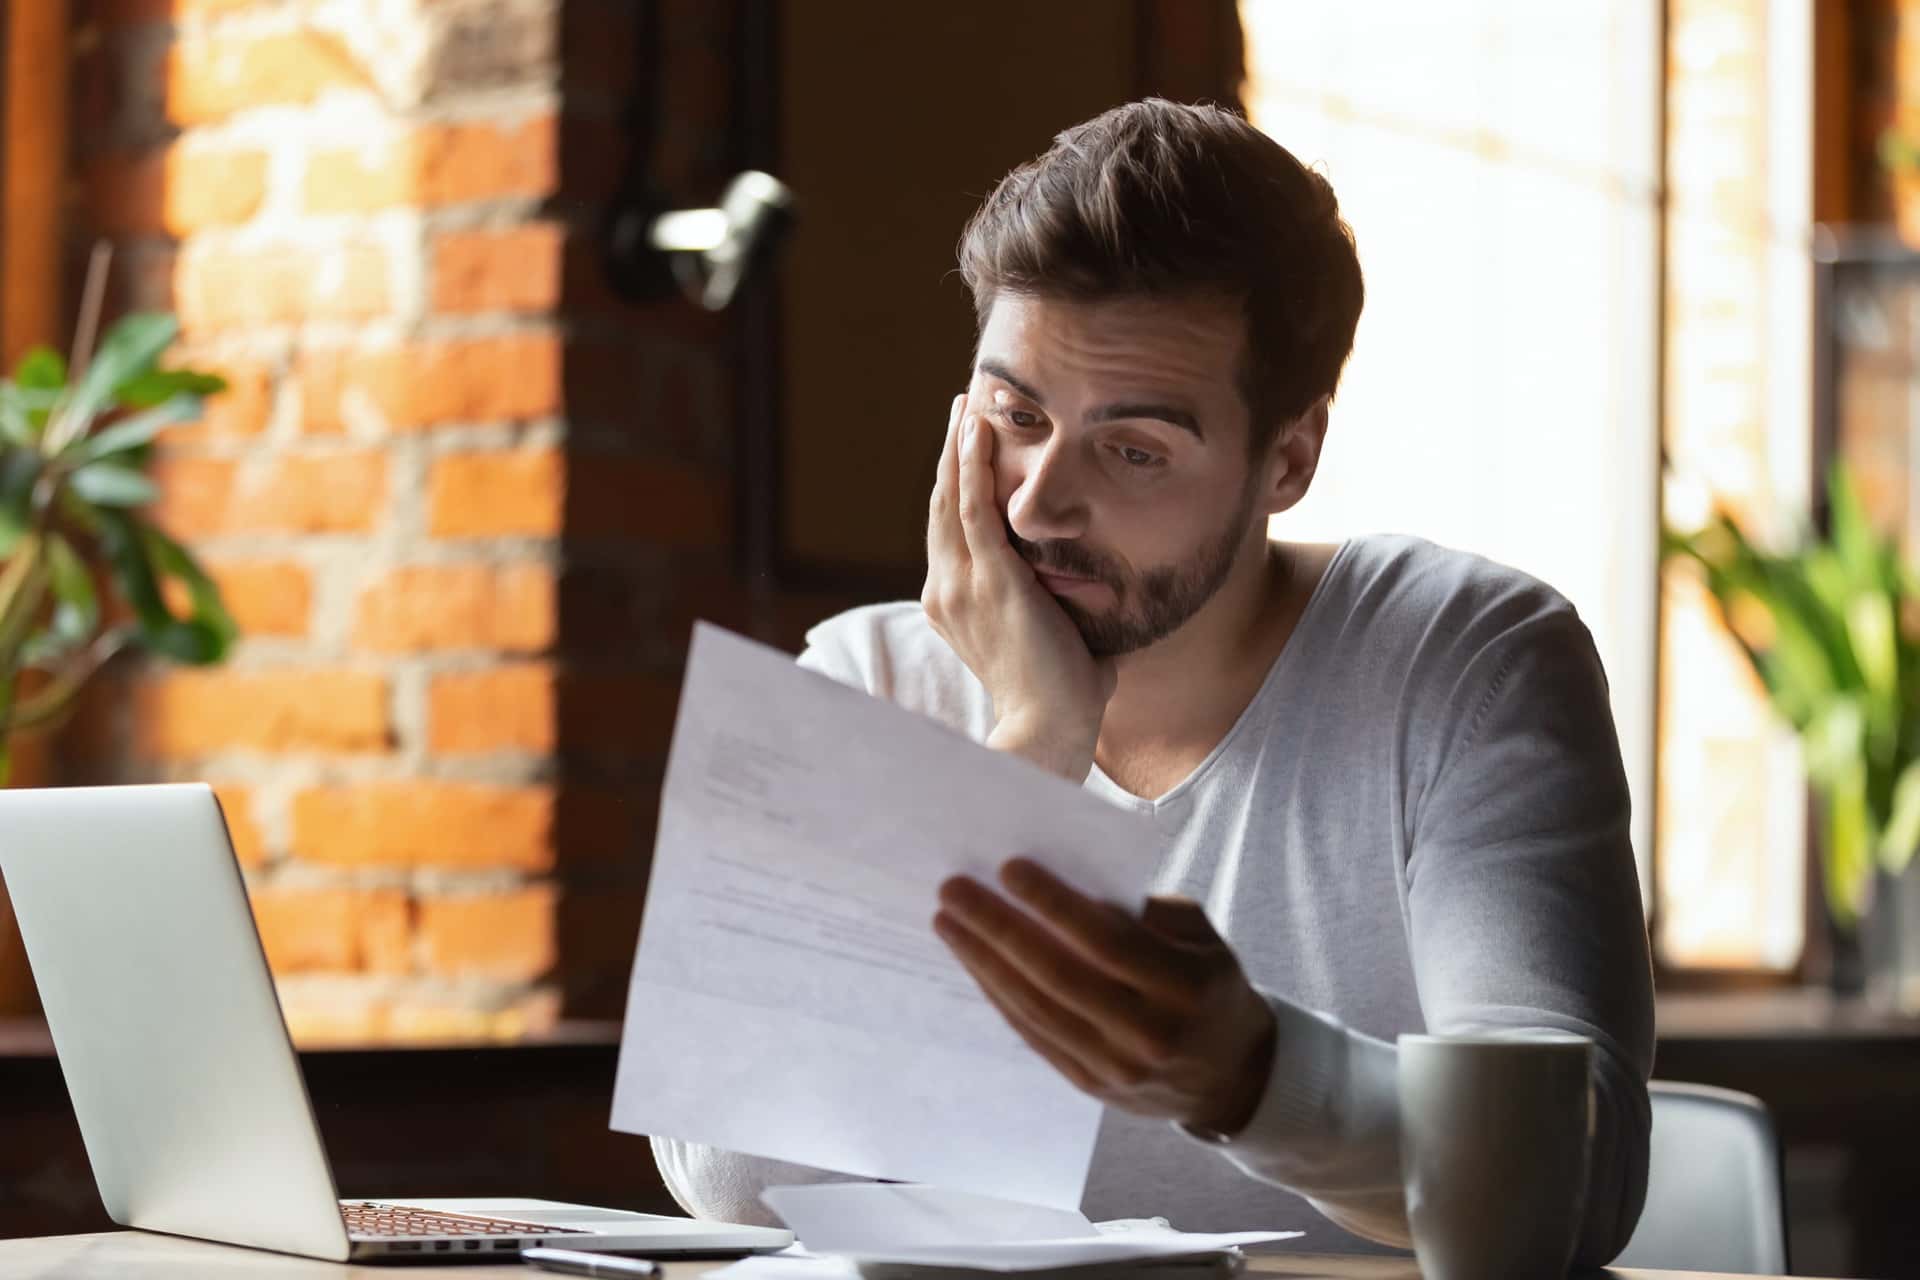 A man with hand on face staring at a legal document